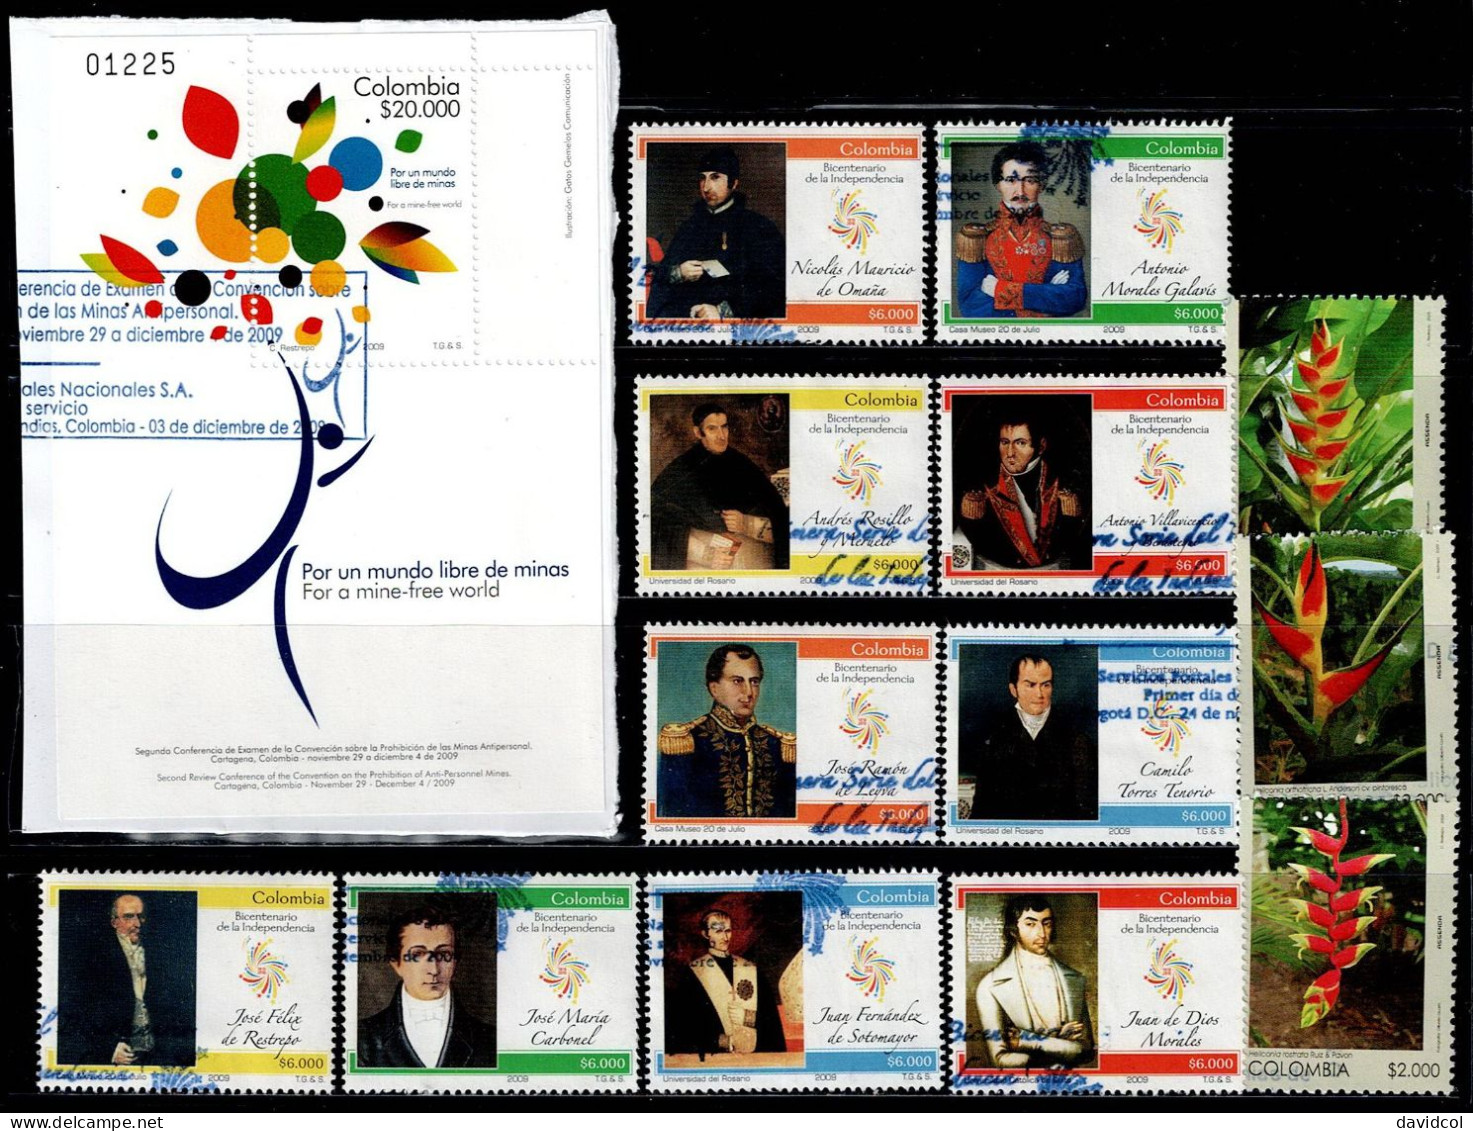 0161AB-COLOMBIA-2009-HCV - USED POSTAL WITH SCARCES-2 COMPLETE SETS - Kolumbien